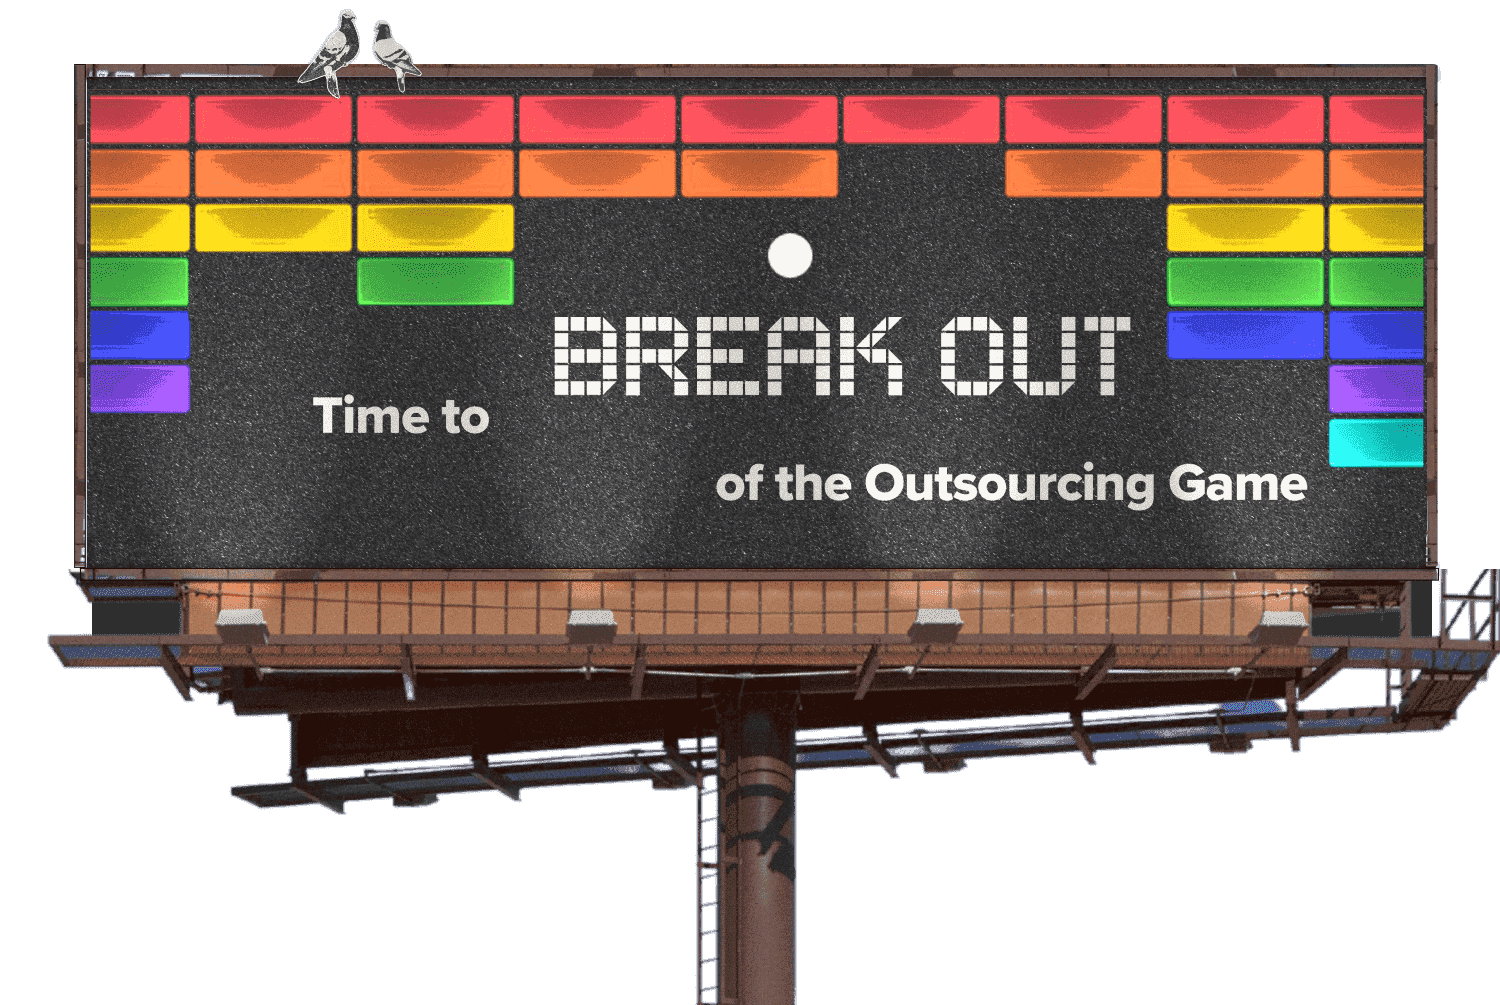 Most outsourcing is outdated